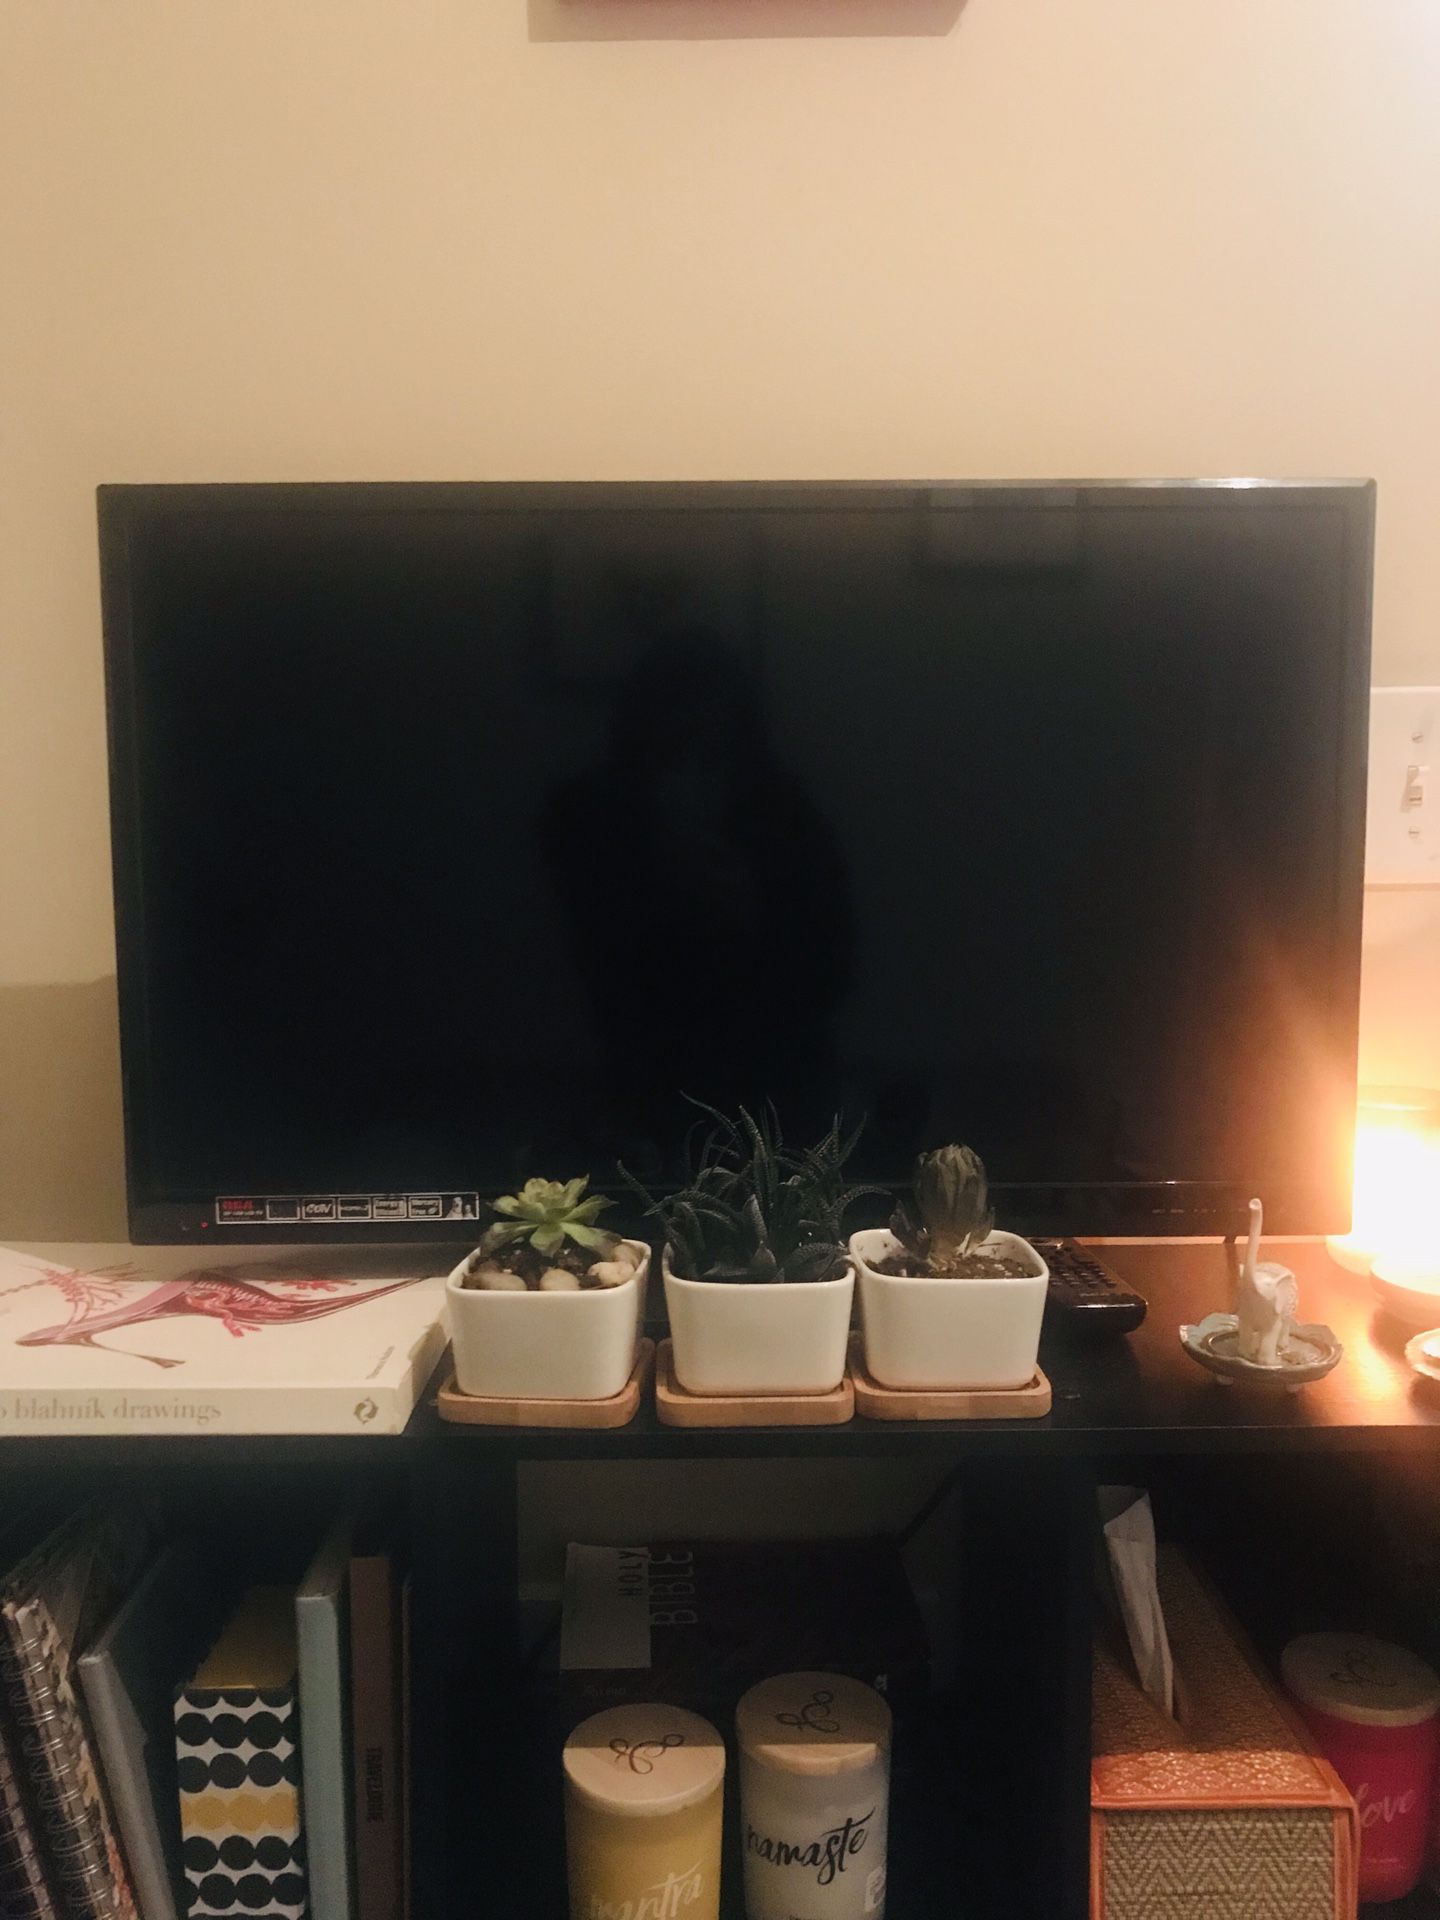 Two Day Moving Sale: RCA 29” TV